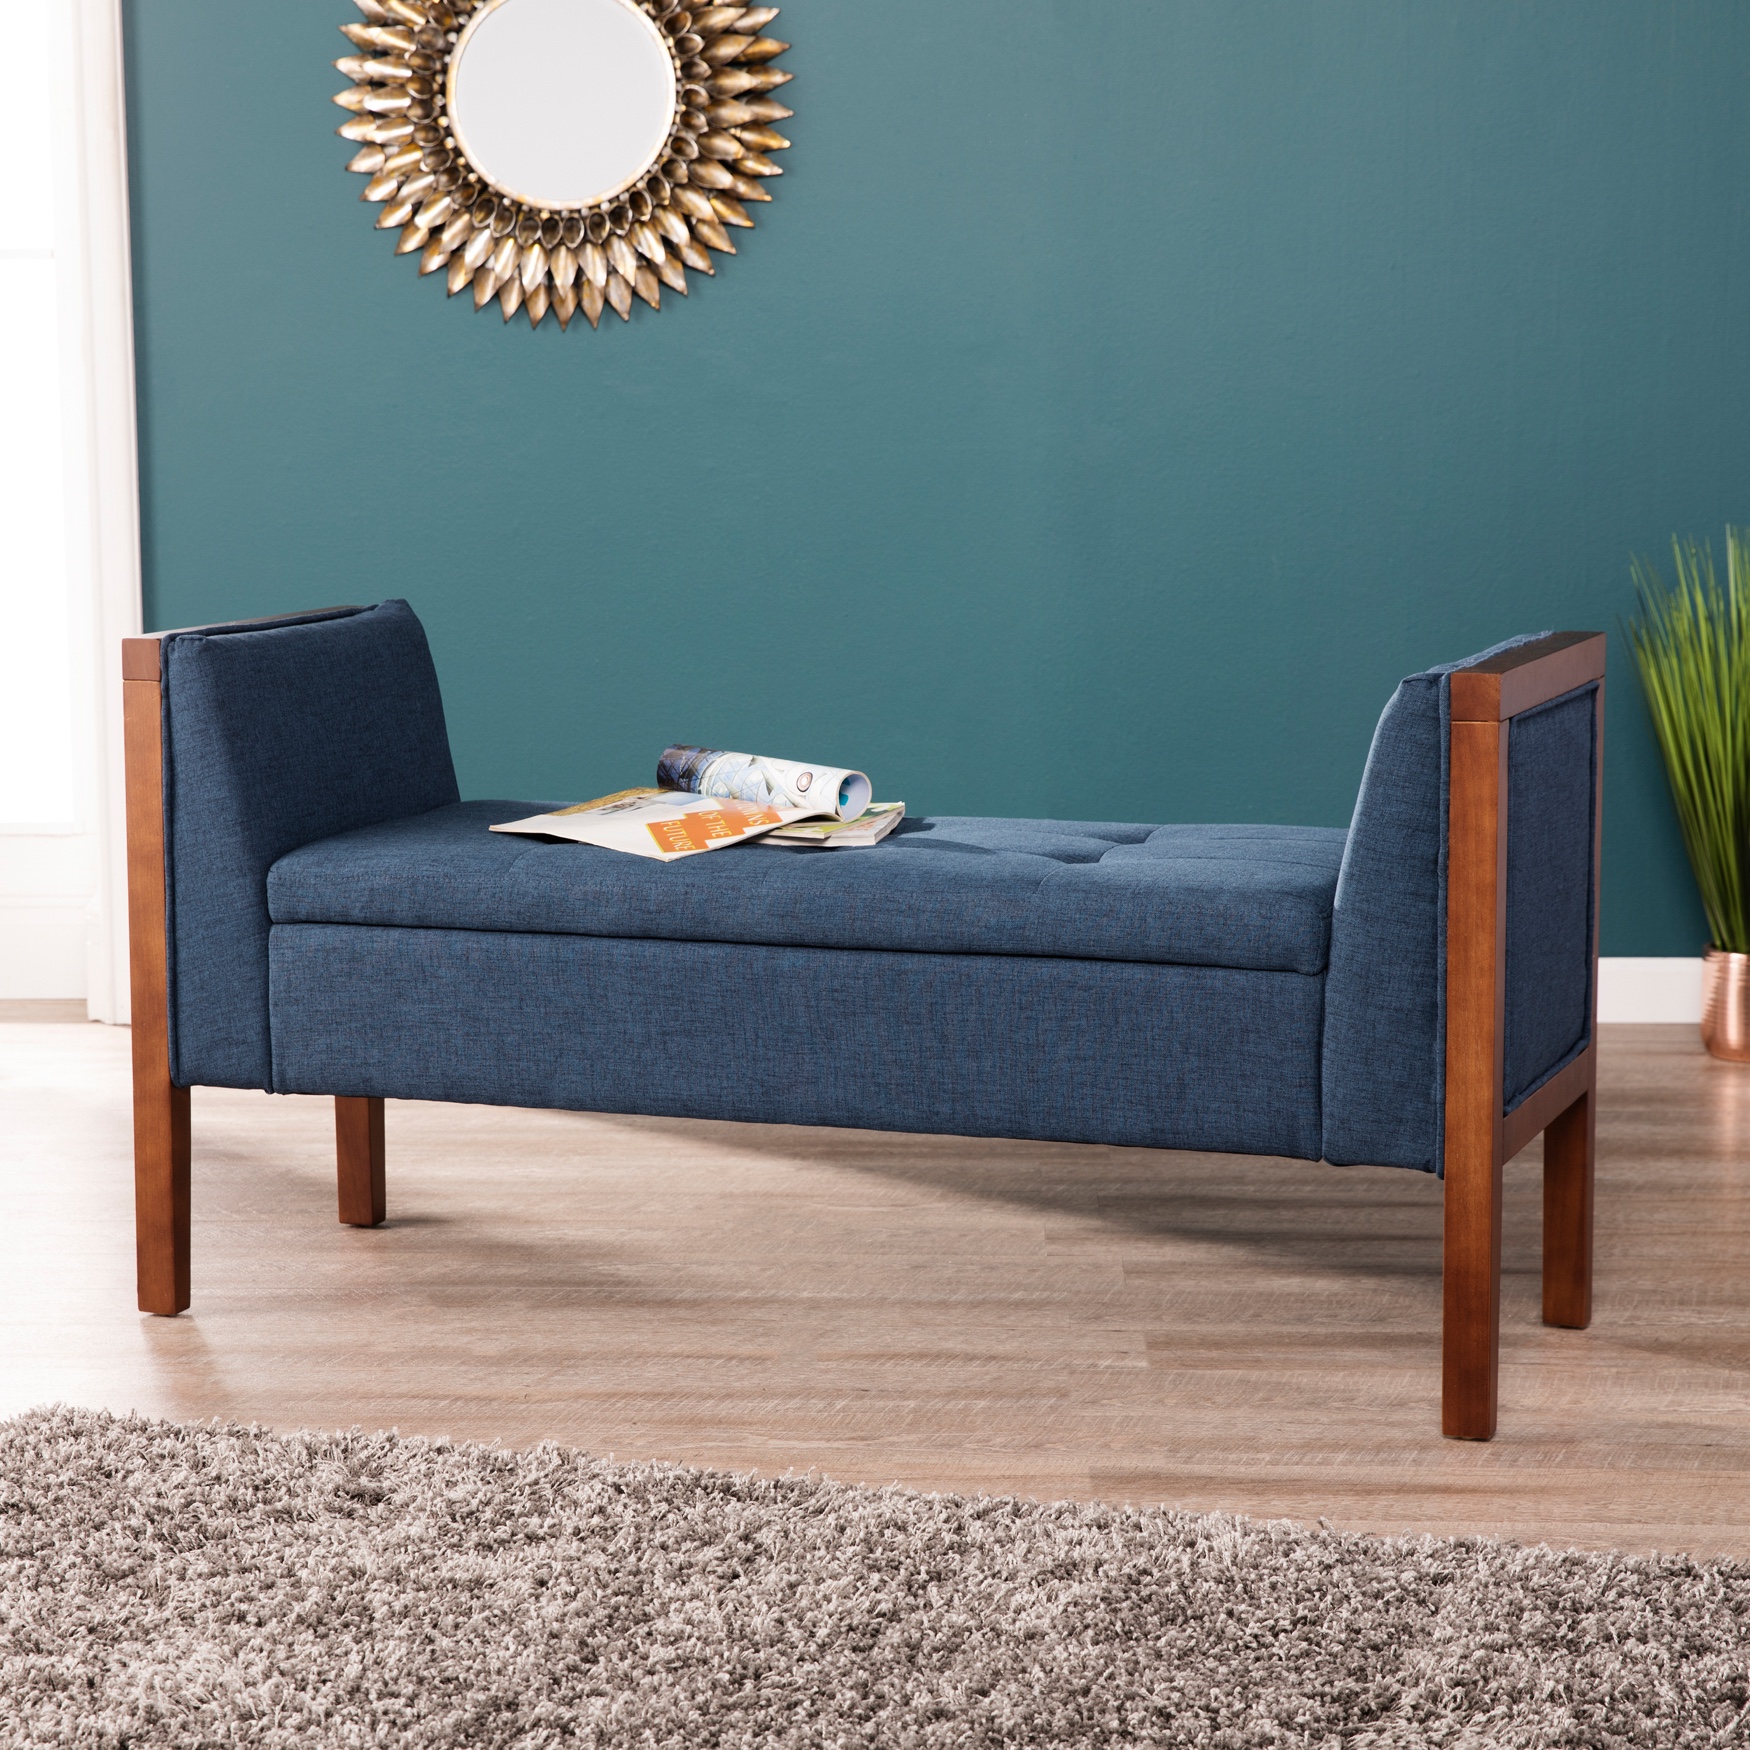 Stylish Upholstered Benches For Entryways